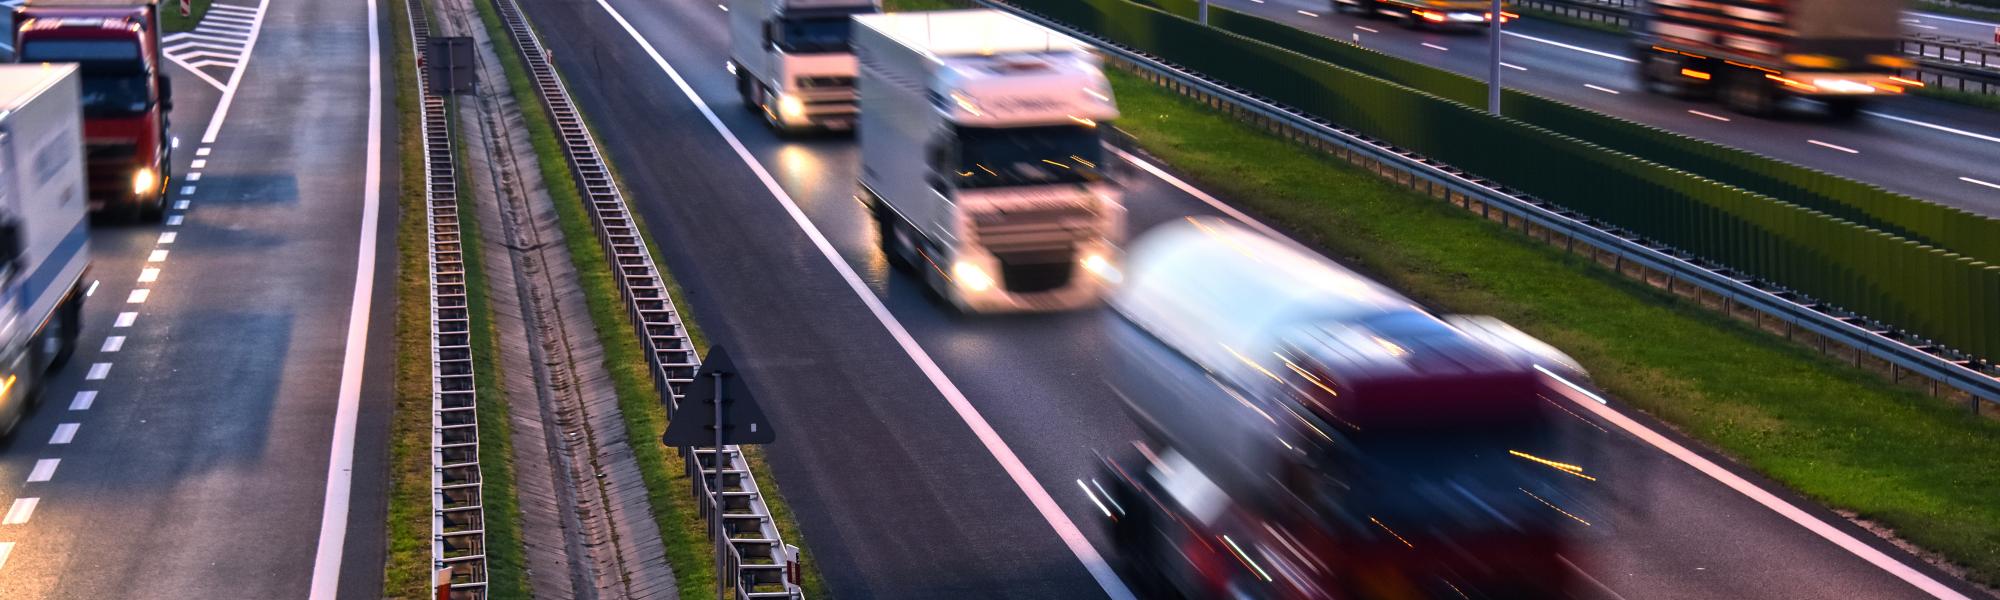 Enforcement of road transport rules must be a top priority for the EU after EU elections